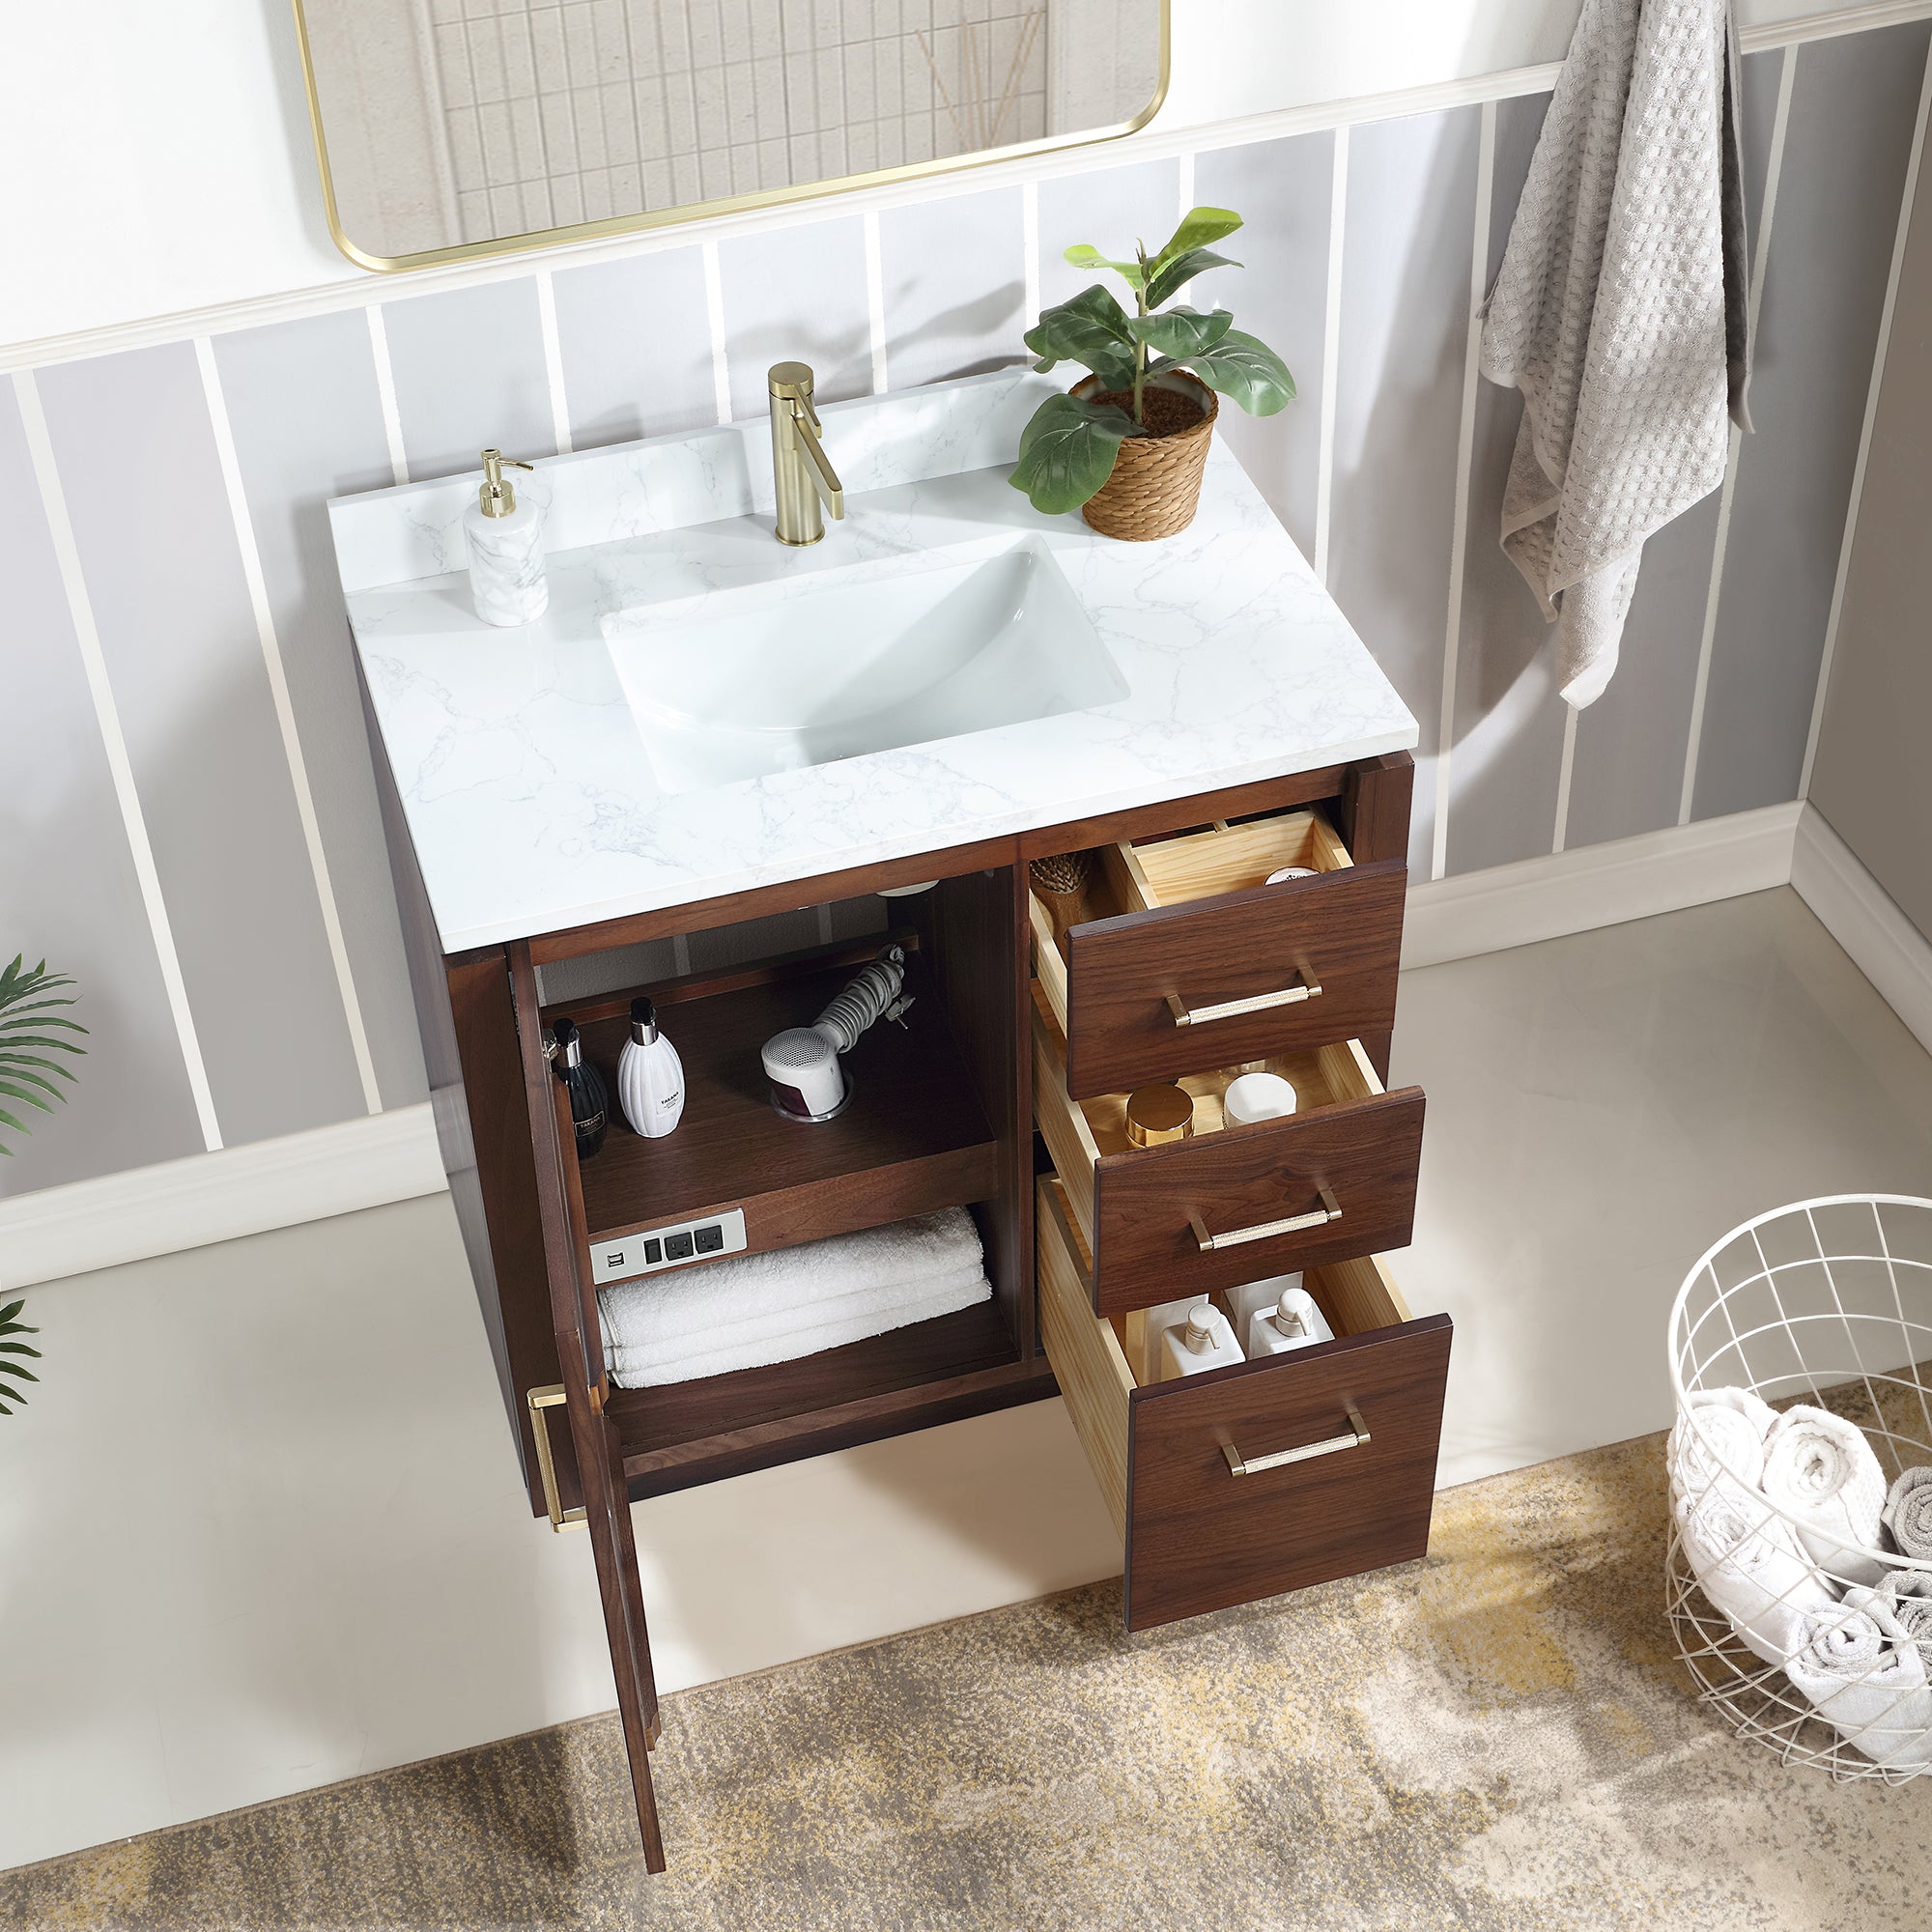 San 36" Free-standing Single Bath Vanity in Natural Walnut with White Grain Composite Stone Top